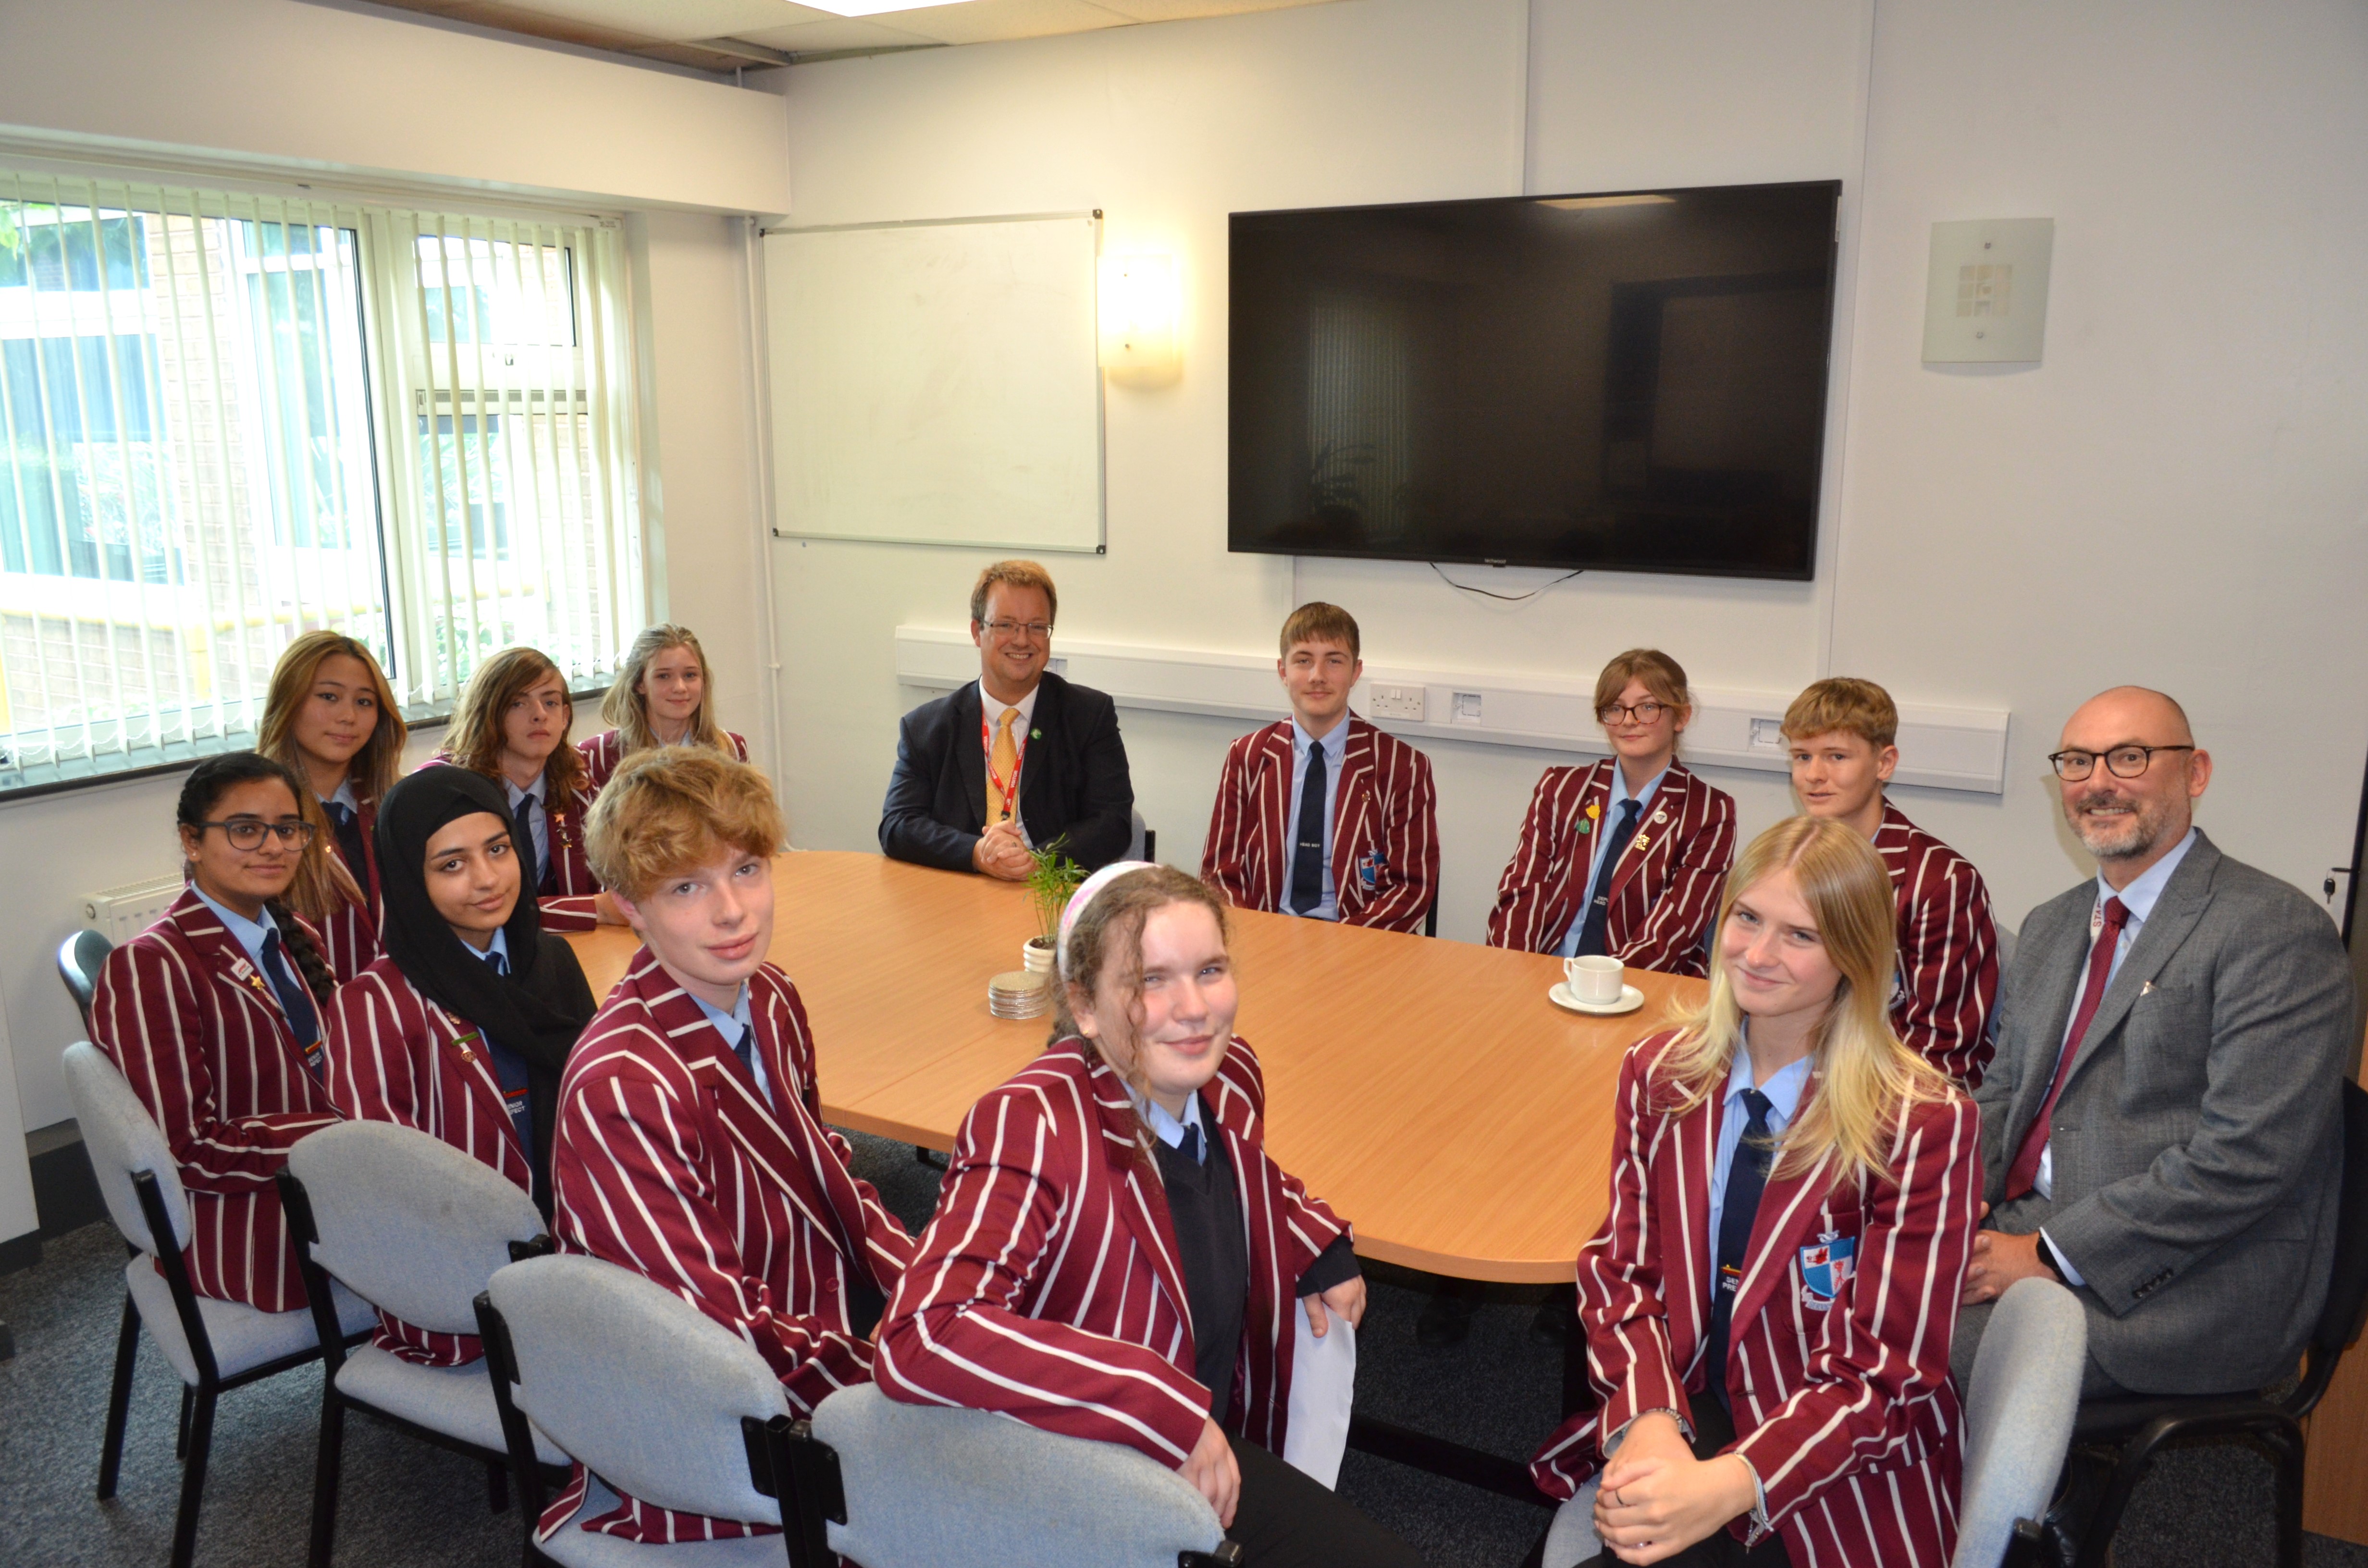 Mike Wood MP with Crestwood School prefects and Headteacher Mr Sutton